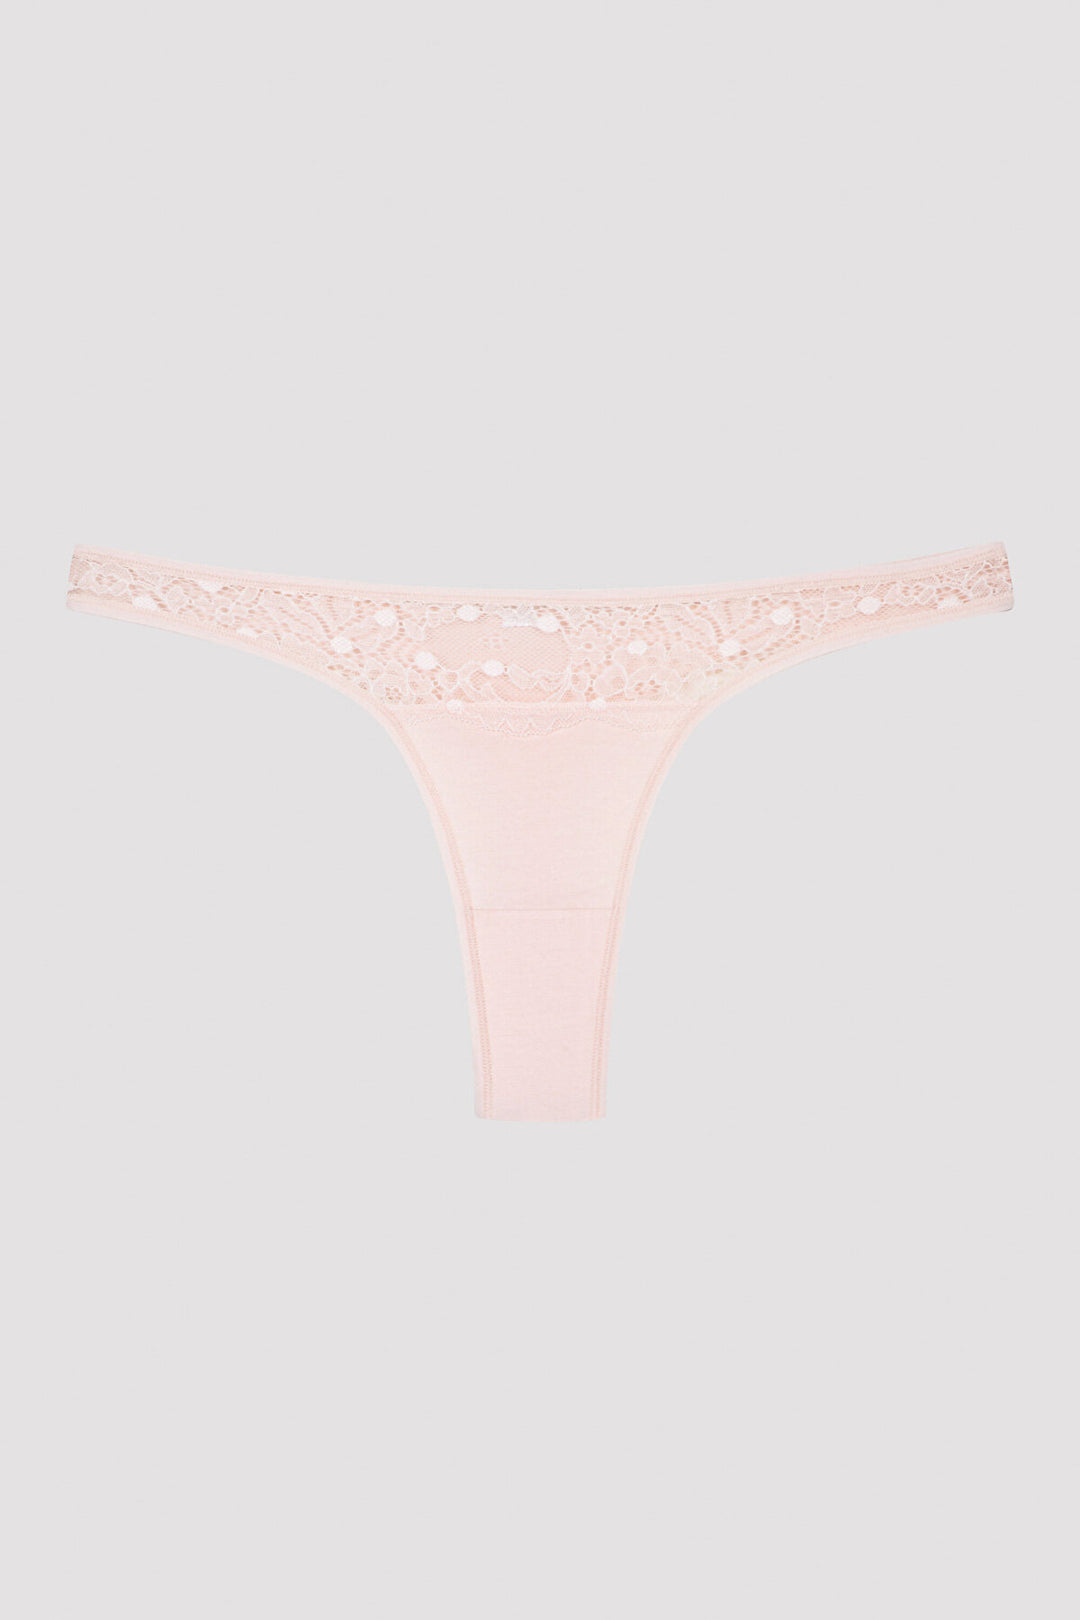 Waterfall Lace Detailed 3In1 Thong